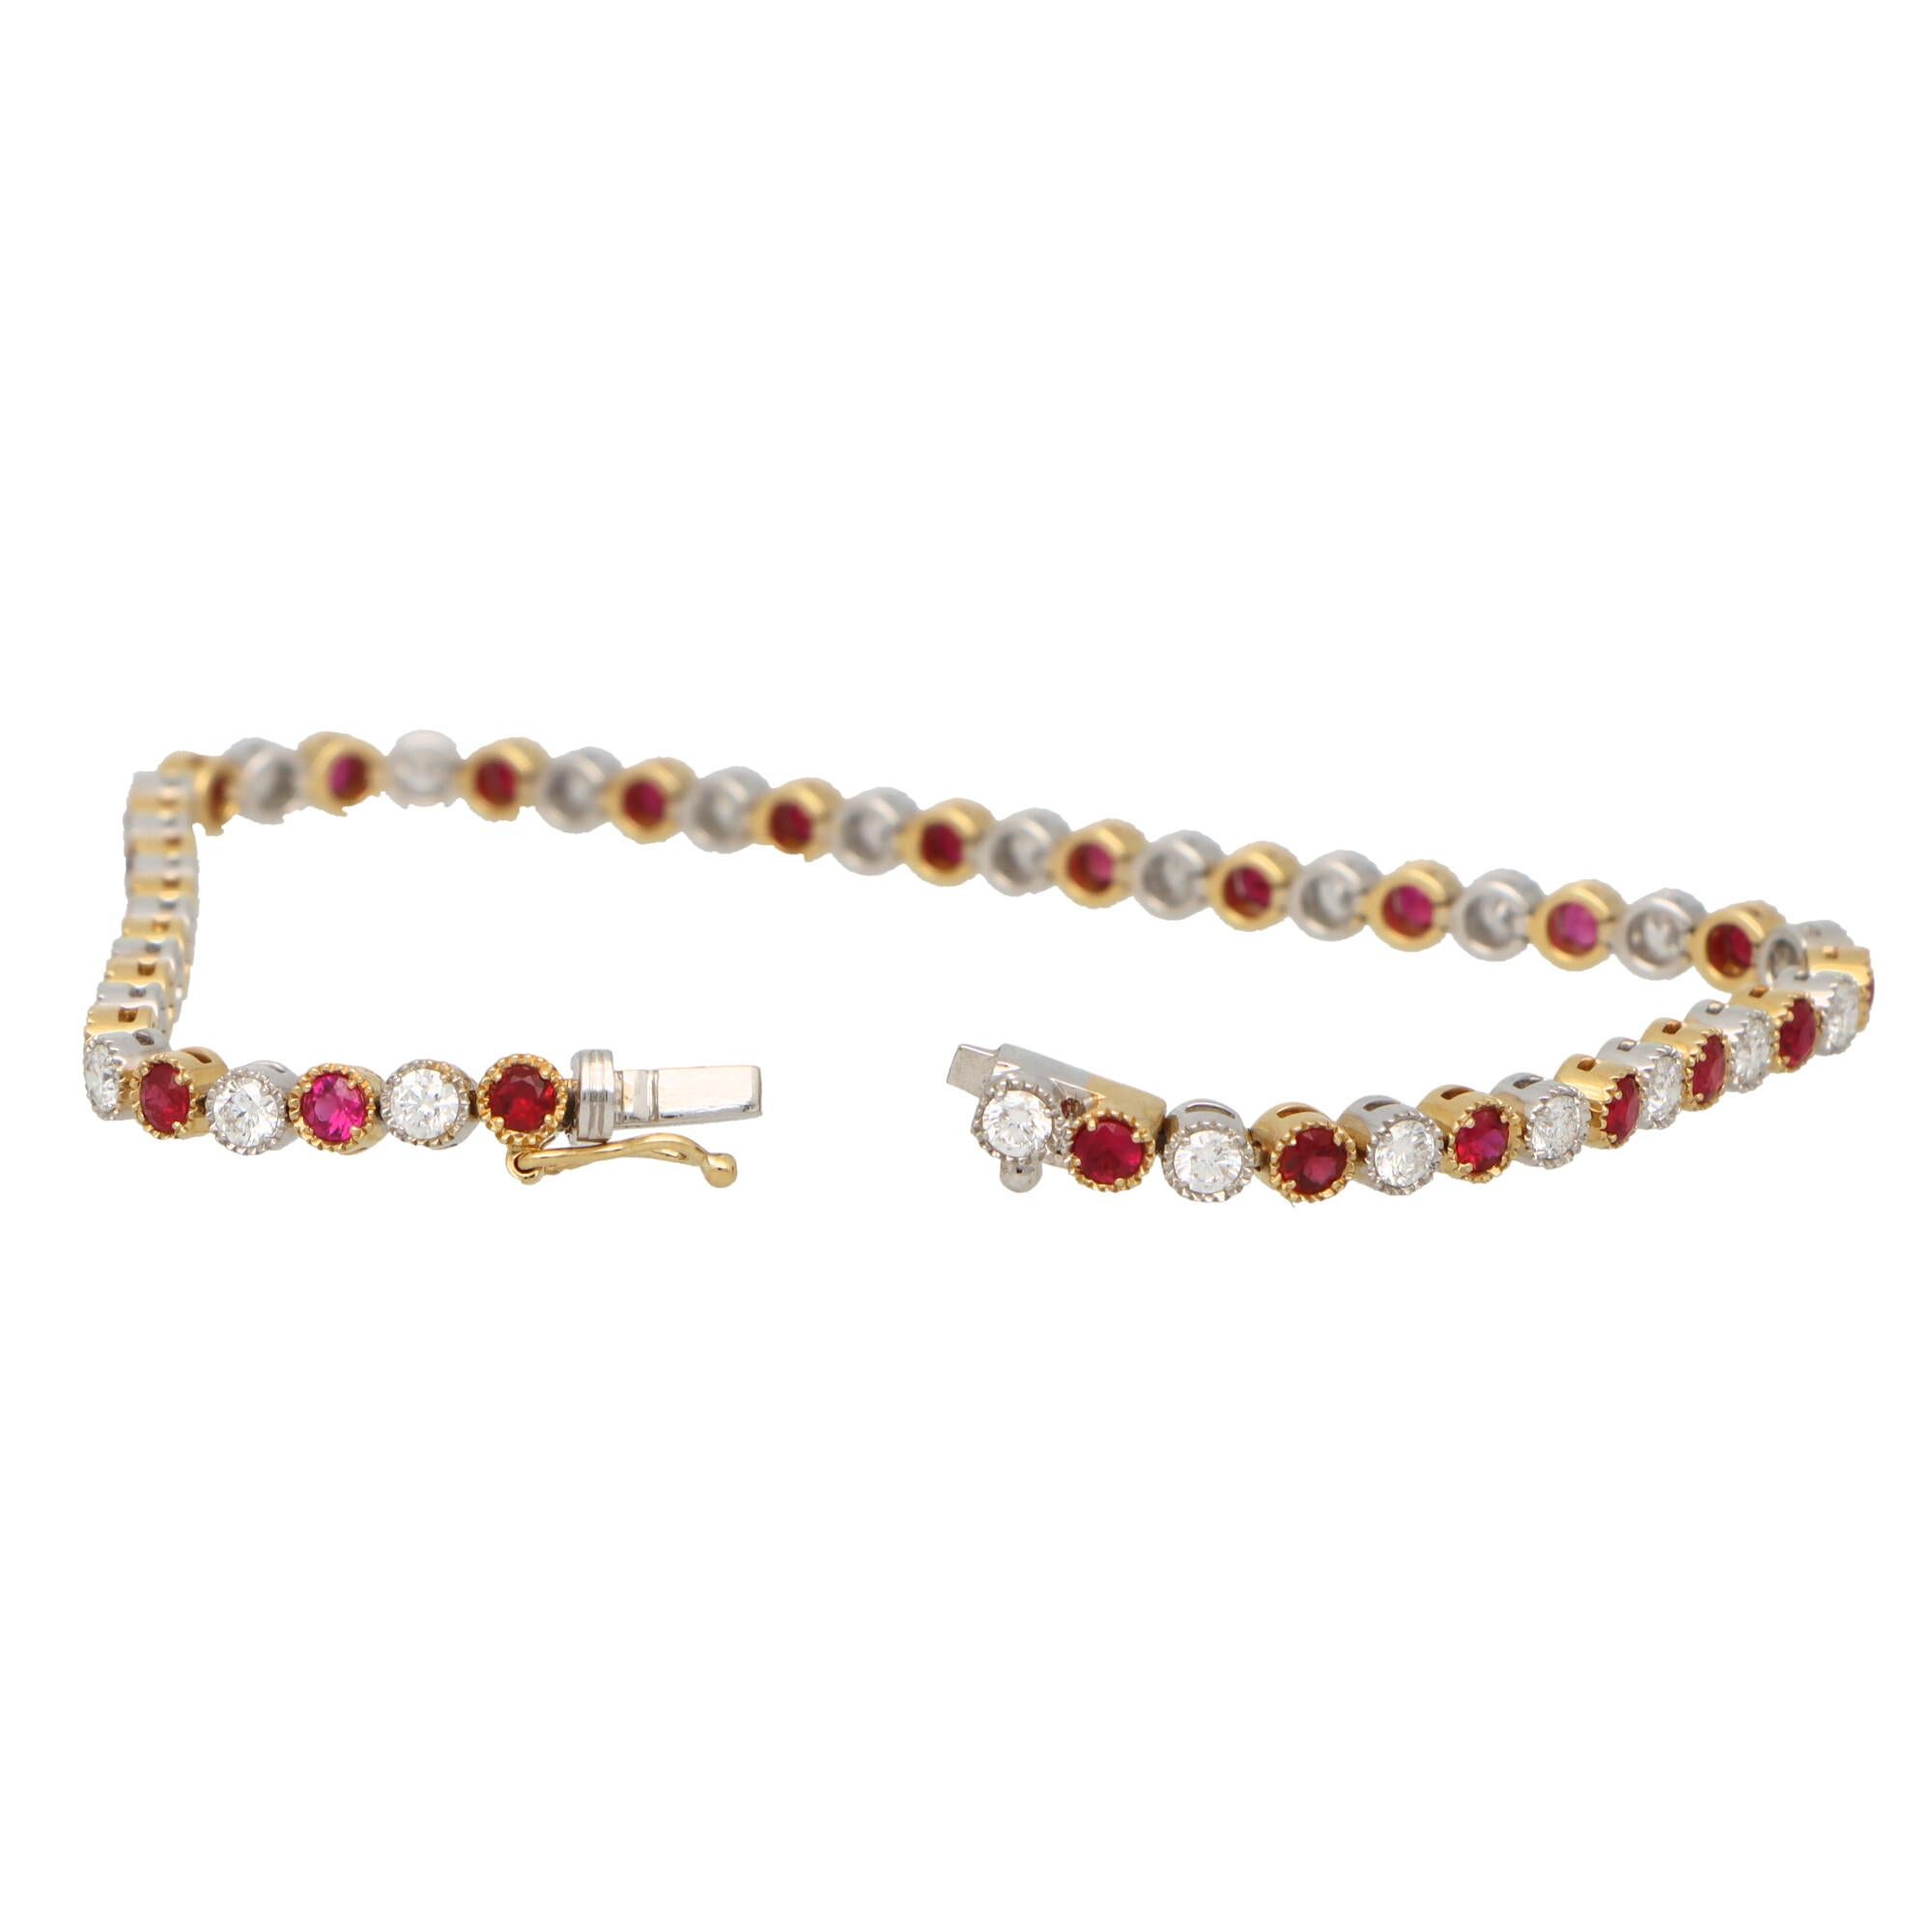 Ruby and Diamond Tennis Line Bracelet Set in 18k Yellow and White Gold 1